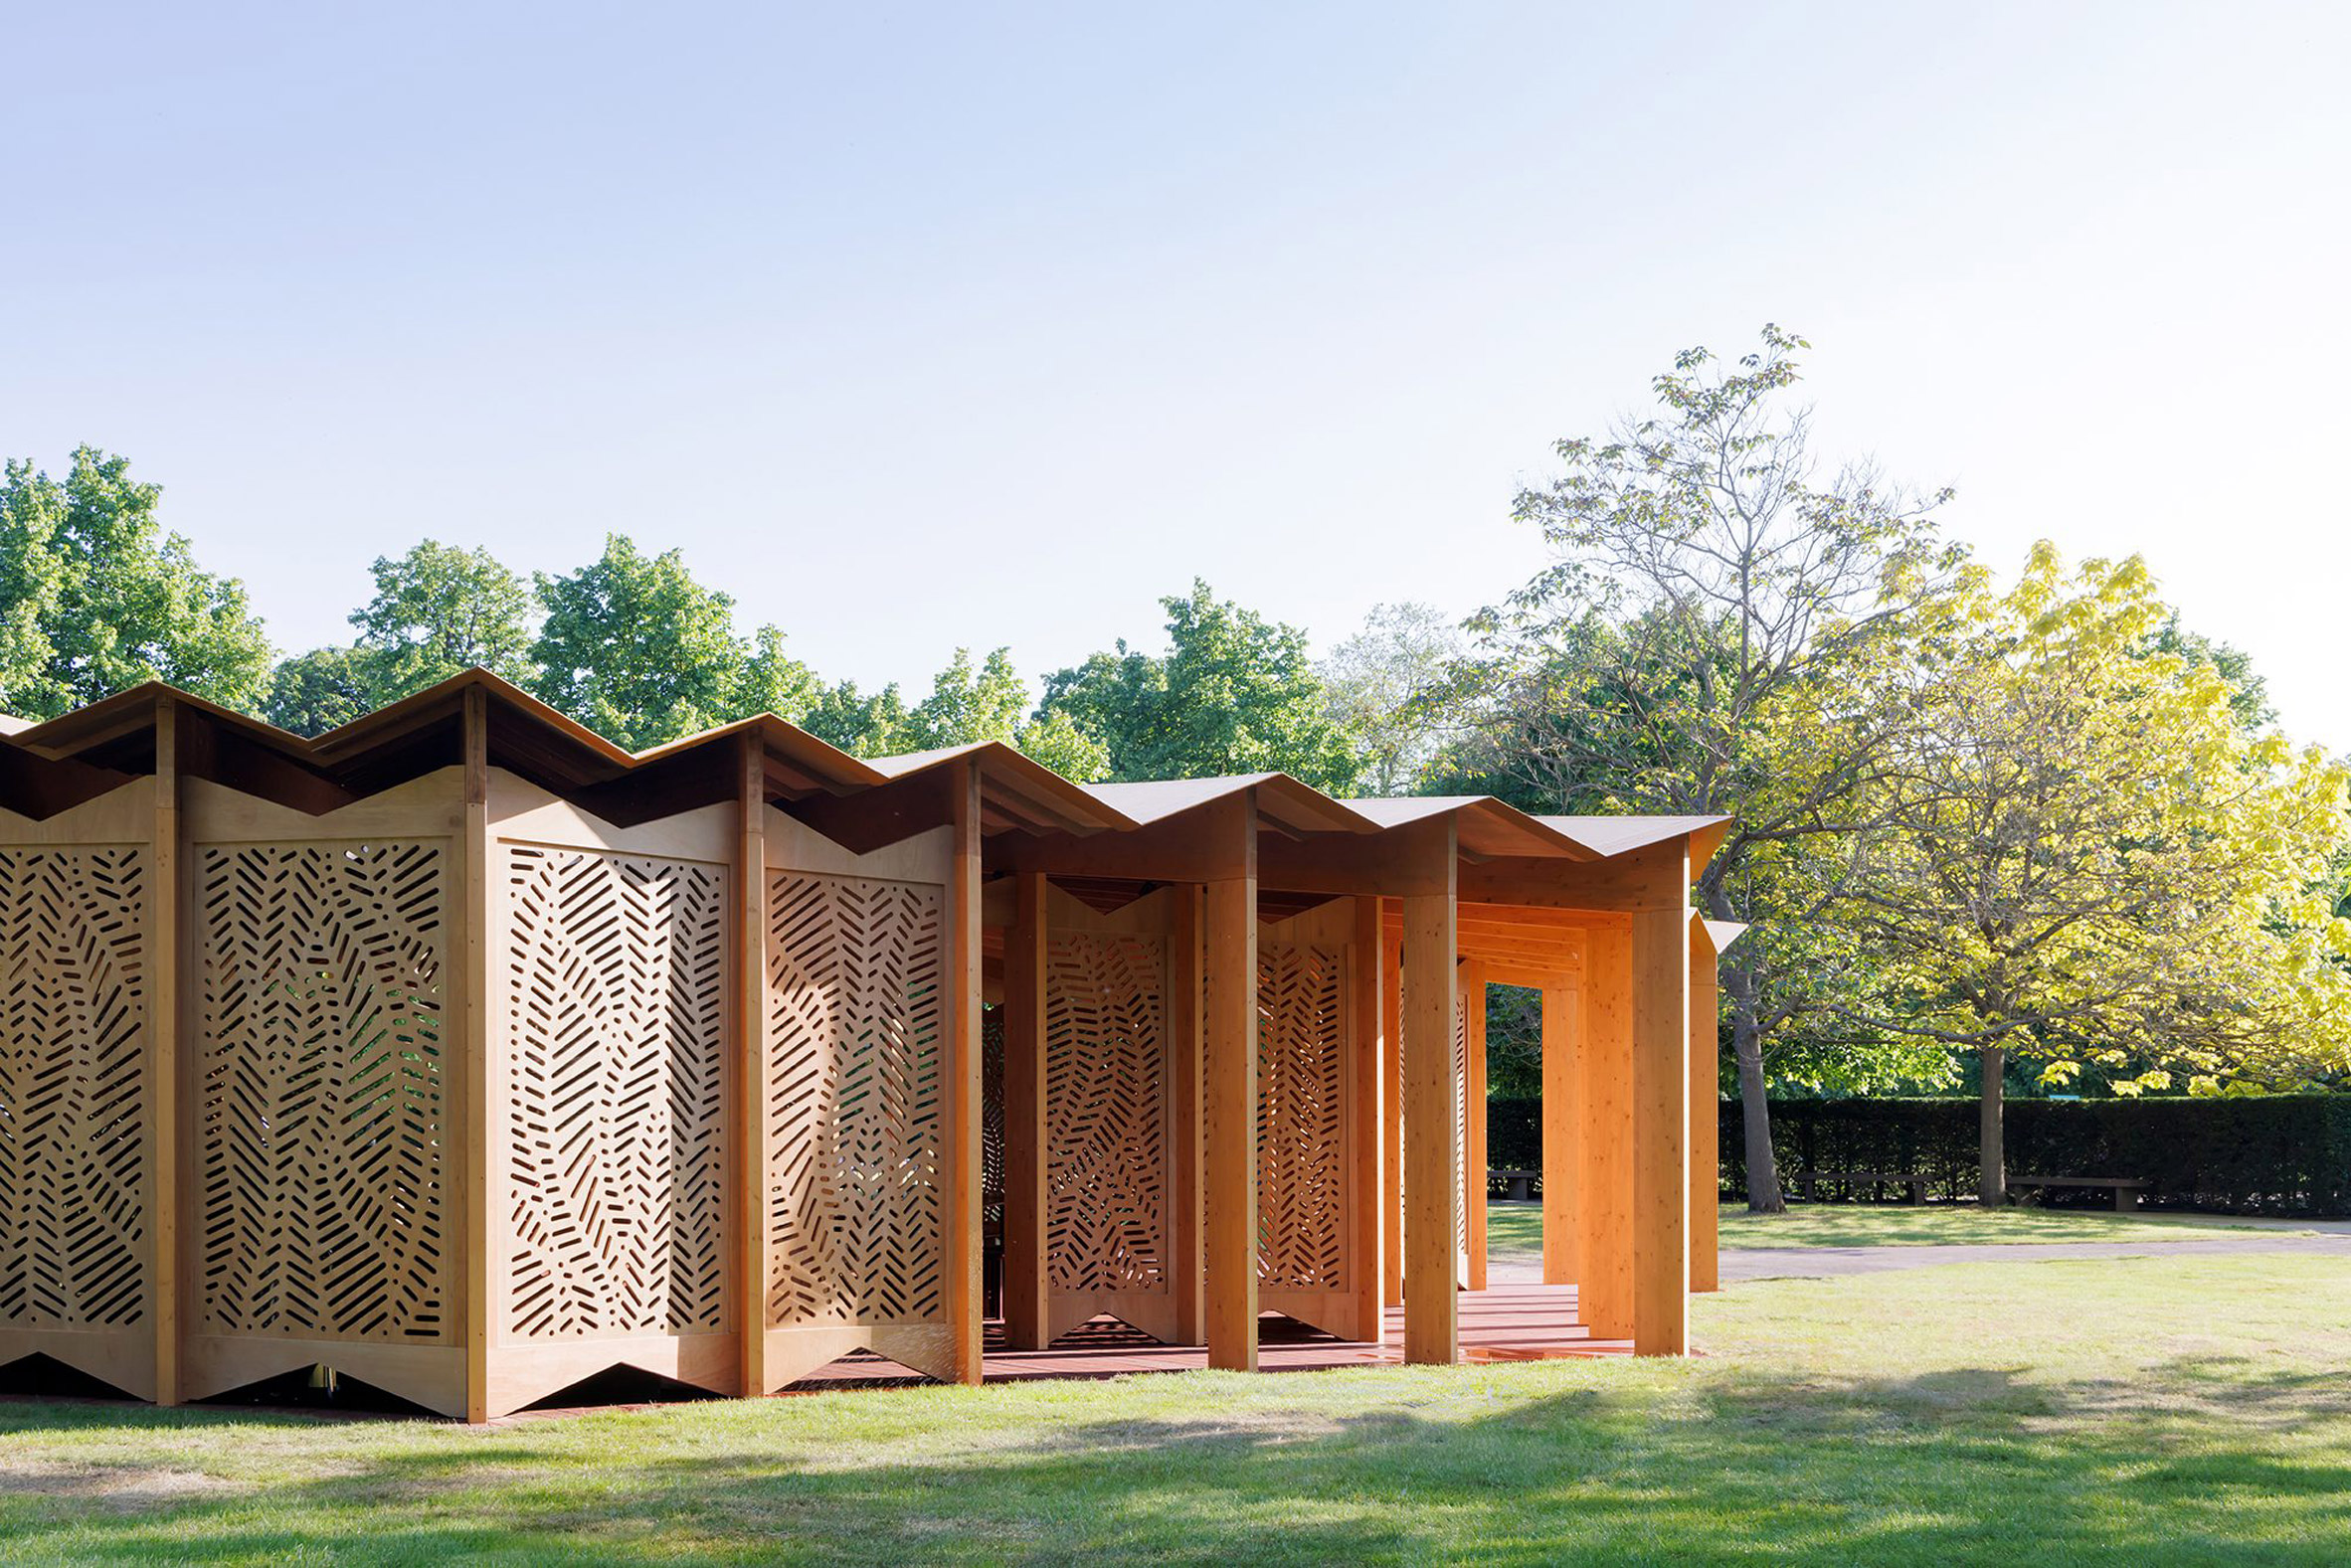 Timber pavilion in London